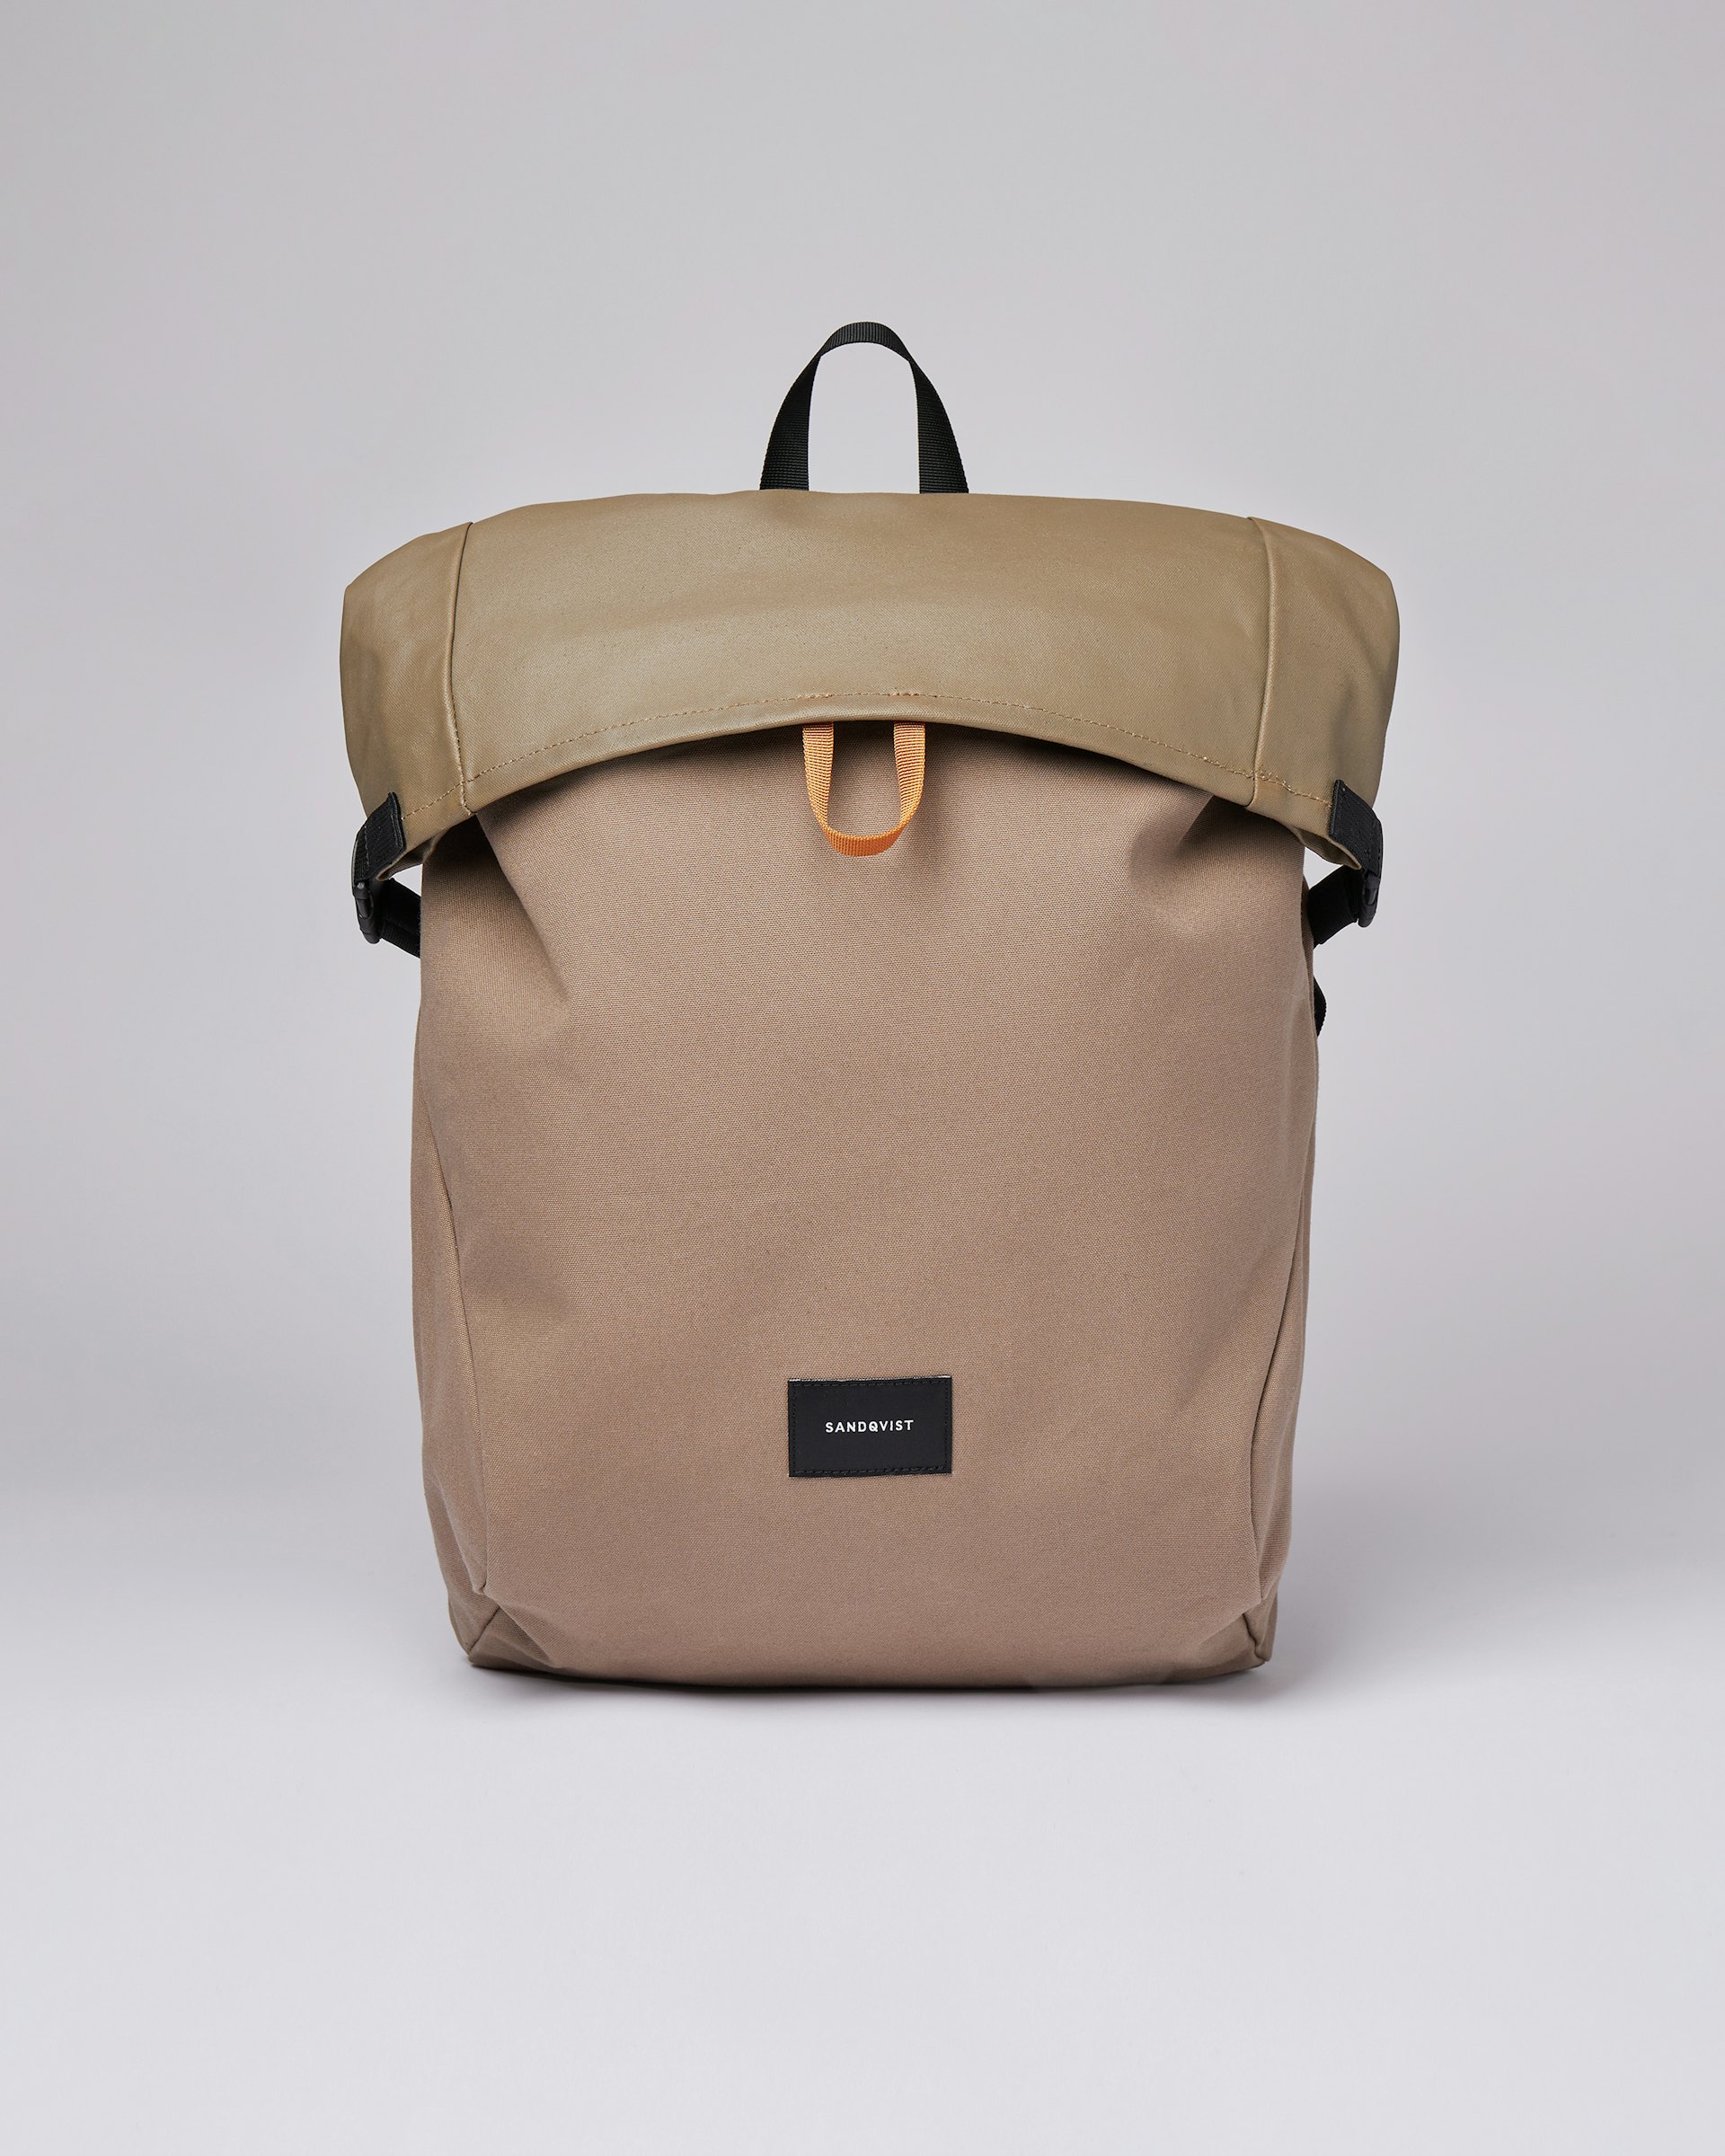 Alfred belongs to the category Backpacks and is in color fossil